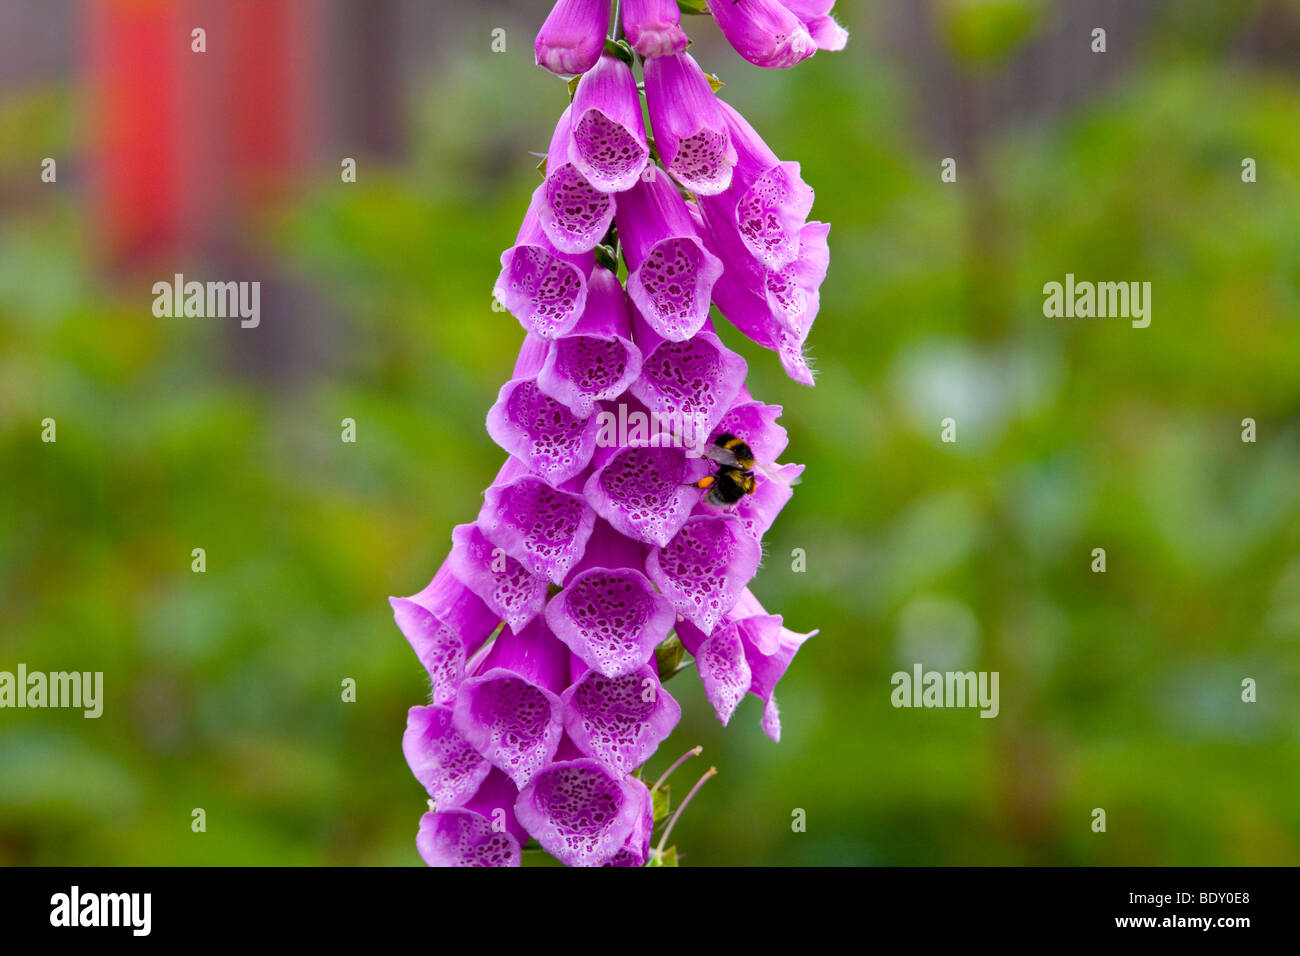 Summer afternoon with bumble bee in the flower of a lupin plant in the garden Stock Photo